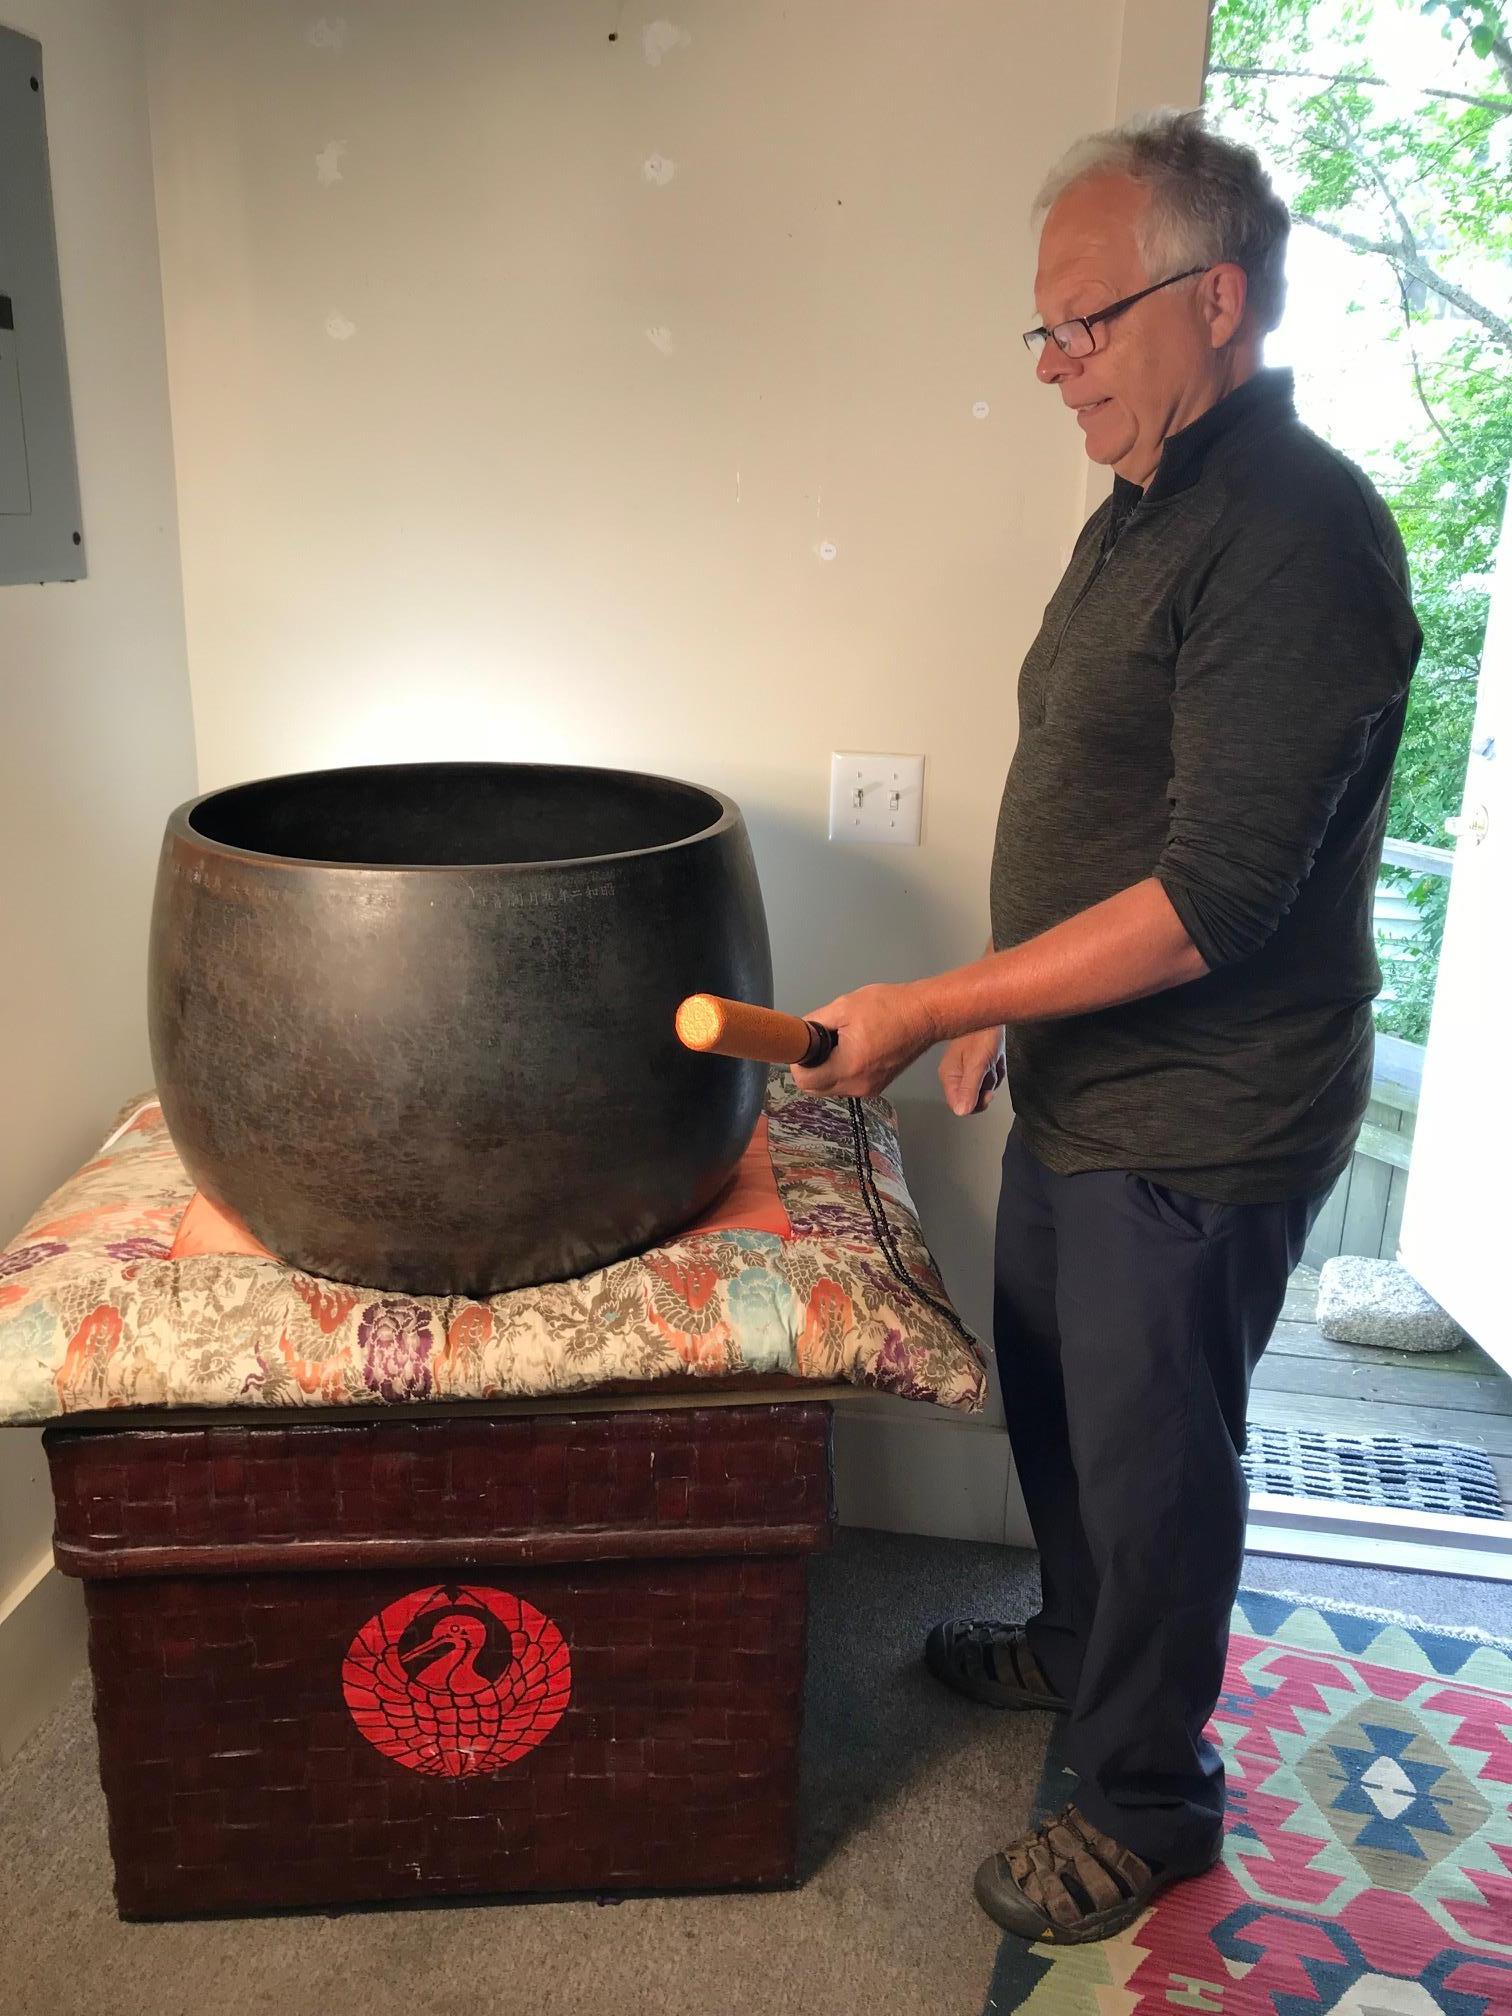 Largest We Have Seen- museum quality with a big bold sound guaranteed to please you

Japanese huge 25 inch diameter solid cast bronze temple bell with a handsome patina from good age. It is signed 1927 and is accompanied by .a striker, a Japanese